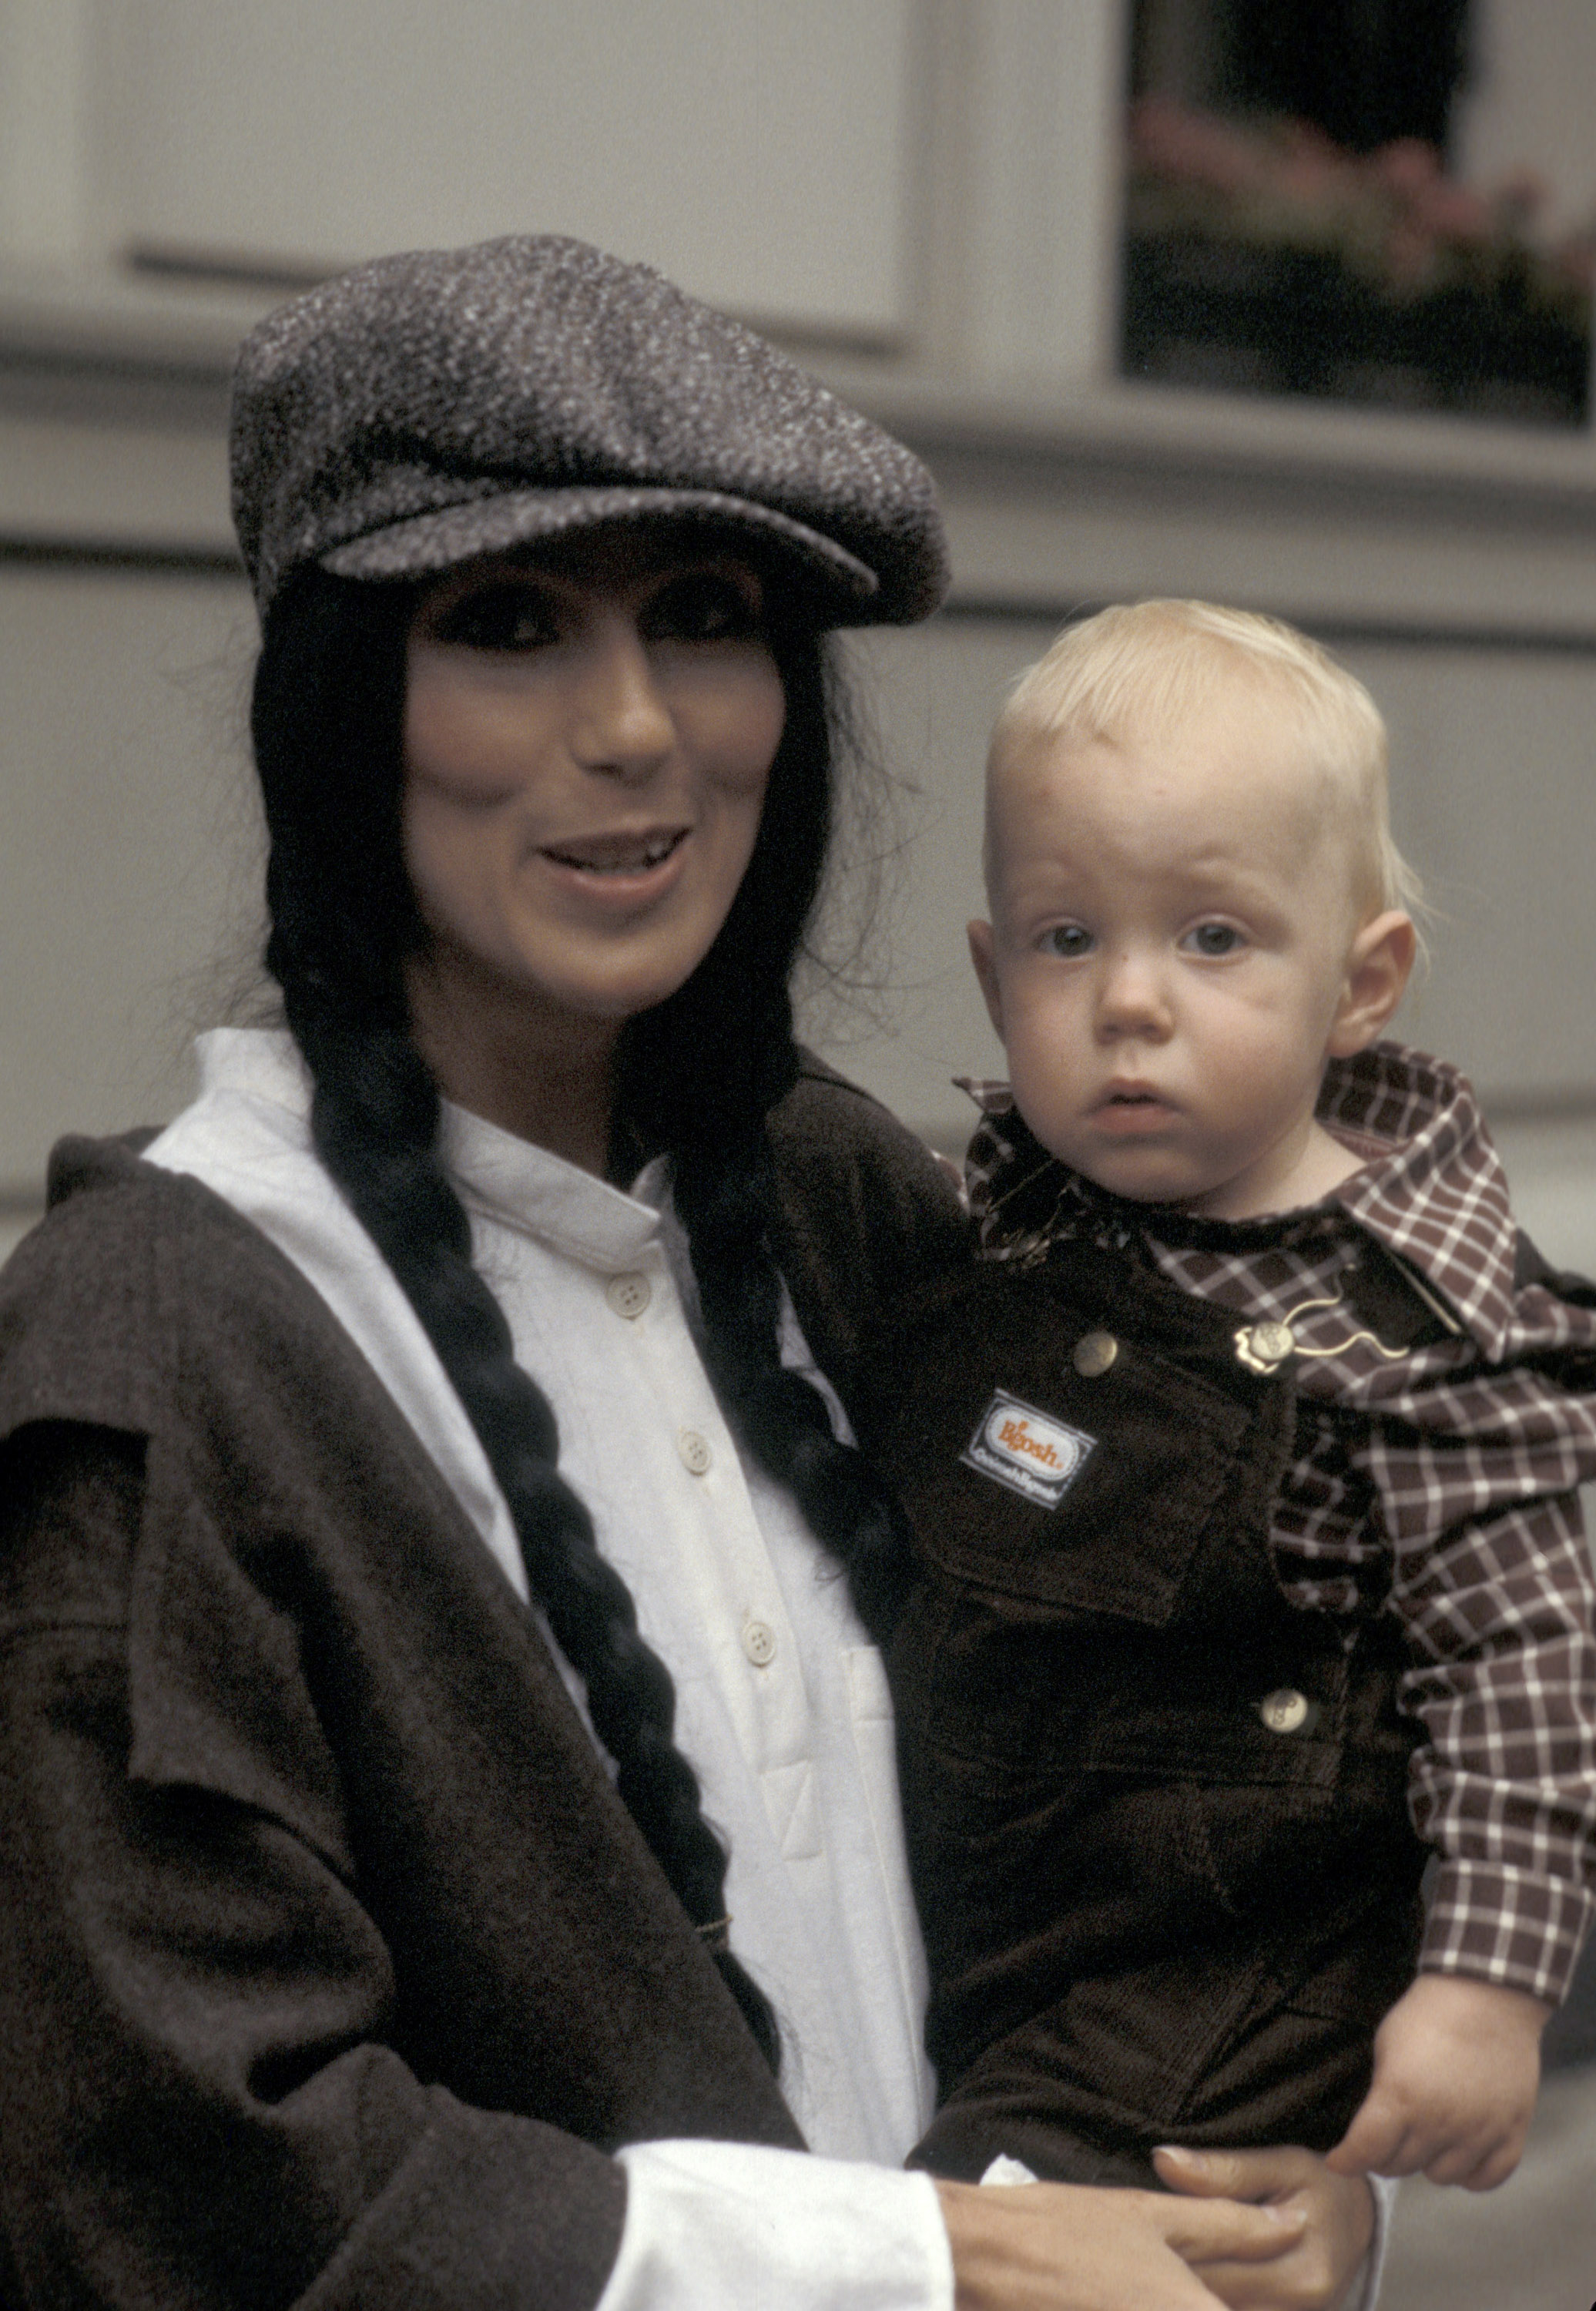 Cher and Elijah Blue Allman during "The Stanley Siegel Show" at Pierre Hotel in New York City, on September 23, 1977 | Source: Getty Images